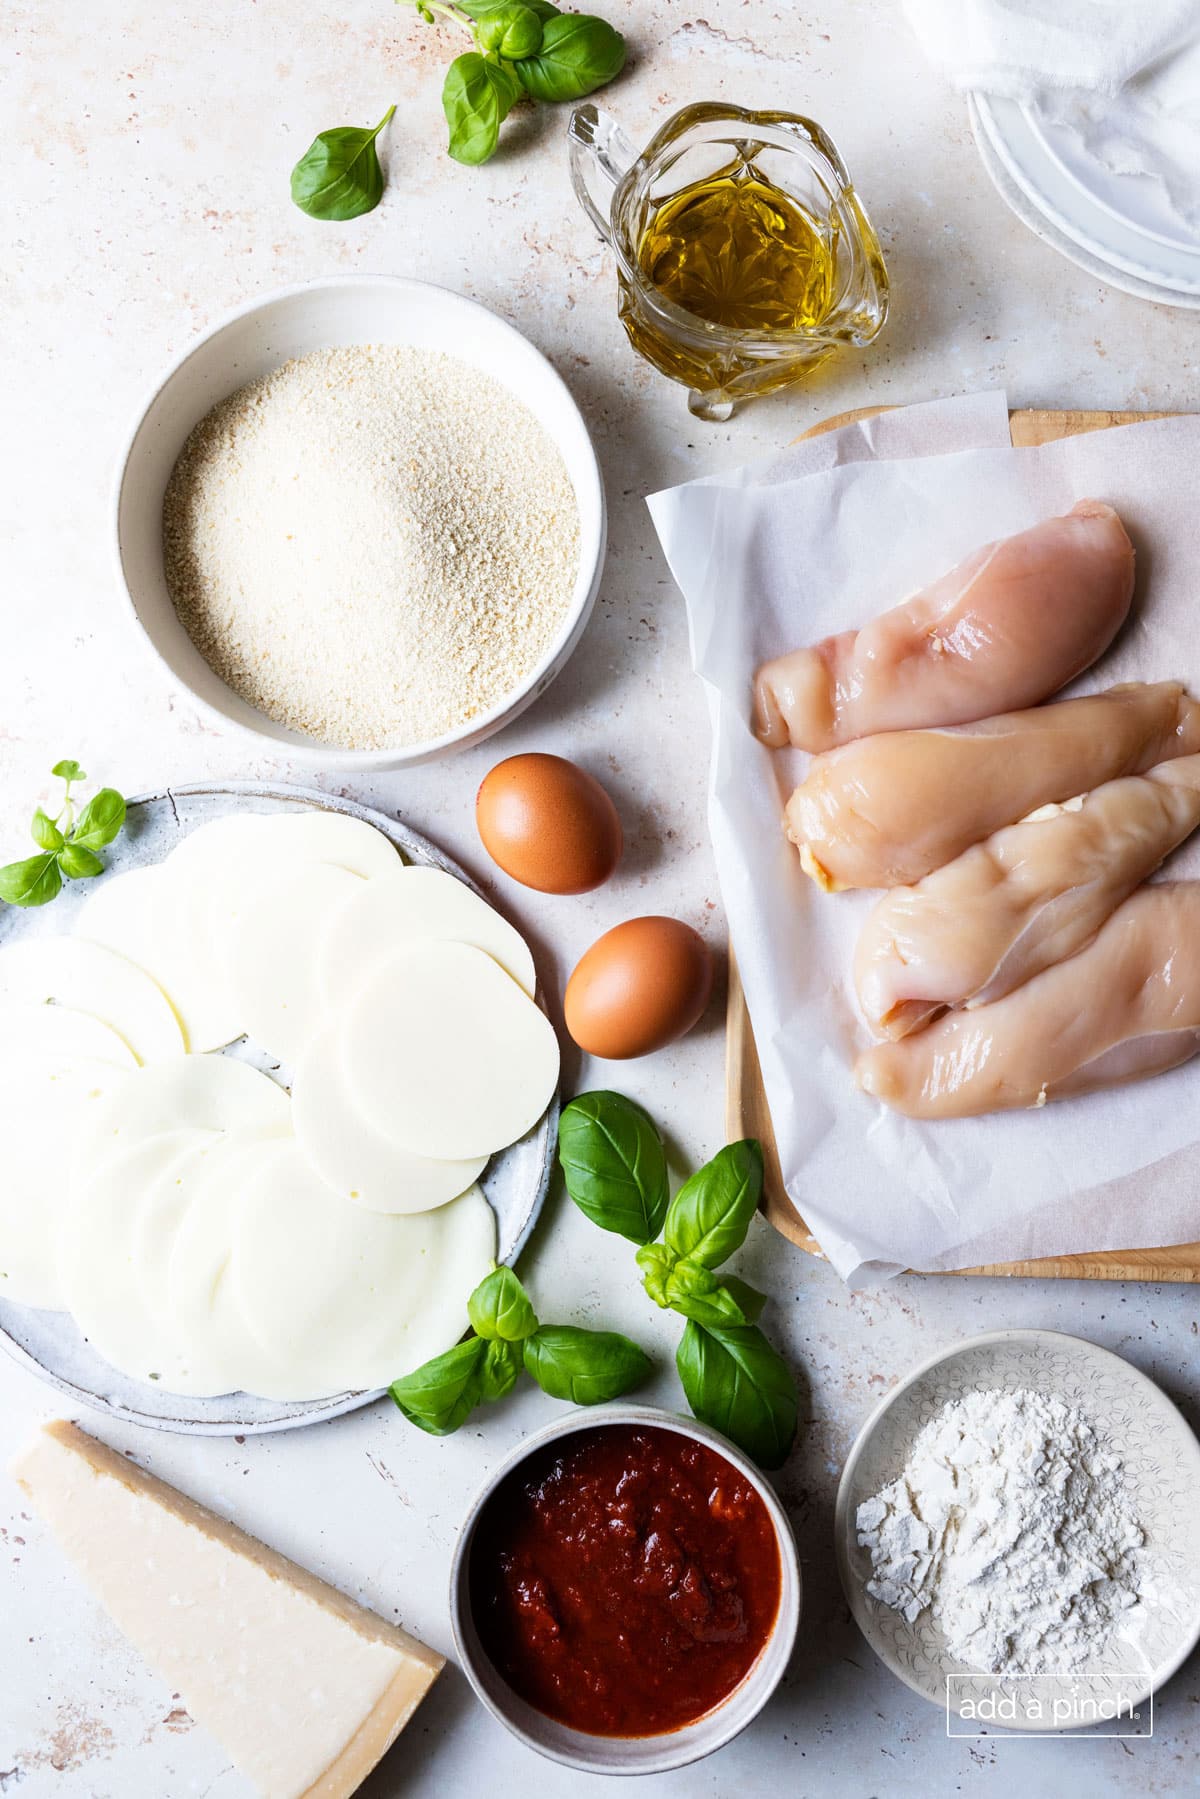 Photograph of ingredients needed for chicken parmesan: chicken breasts, eggs, flour, marinara sauce, mozzarella cheese slices and grated parmesan cheese.